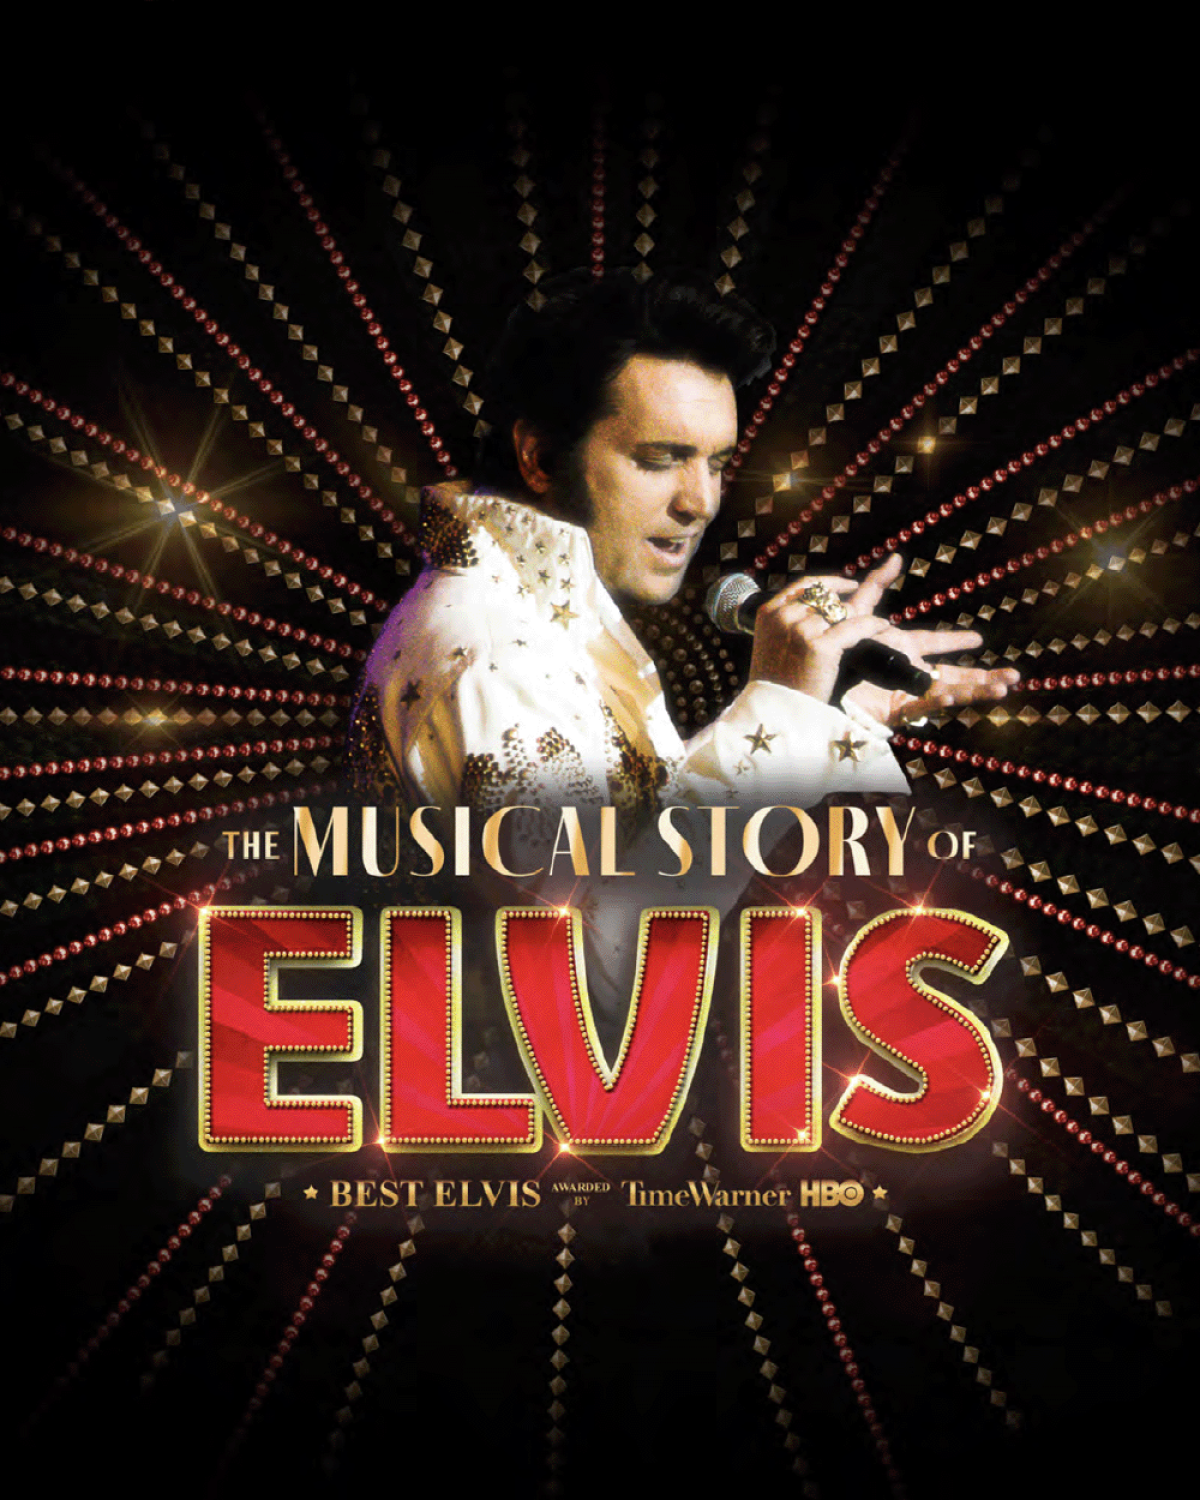 The Musical Story Of Elvis in der Olympia Tickets